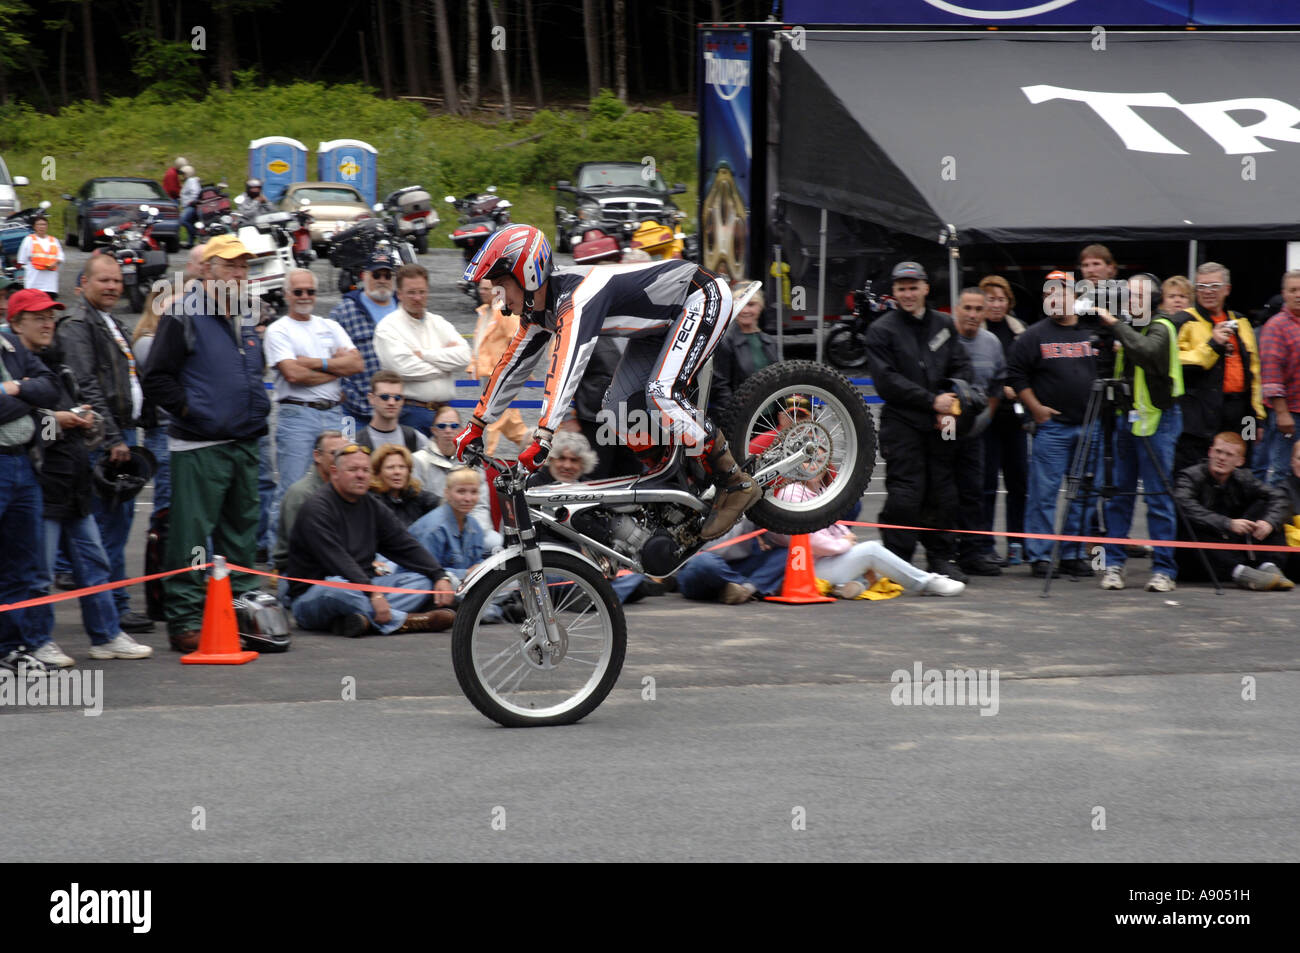 Lake George NY Americade Bike rally Tommi Ahvala former world trials riding champion performs stunts Trials riders use a special Stock Photo